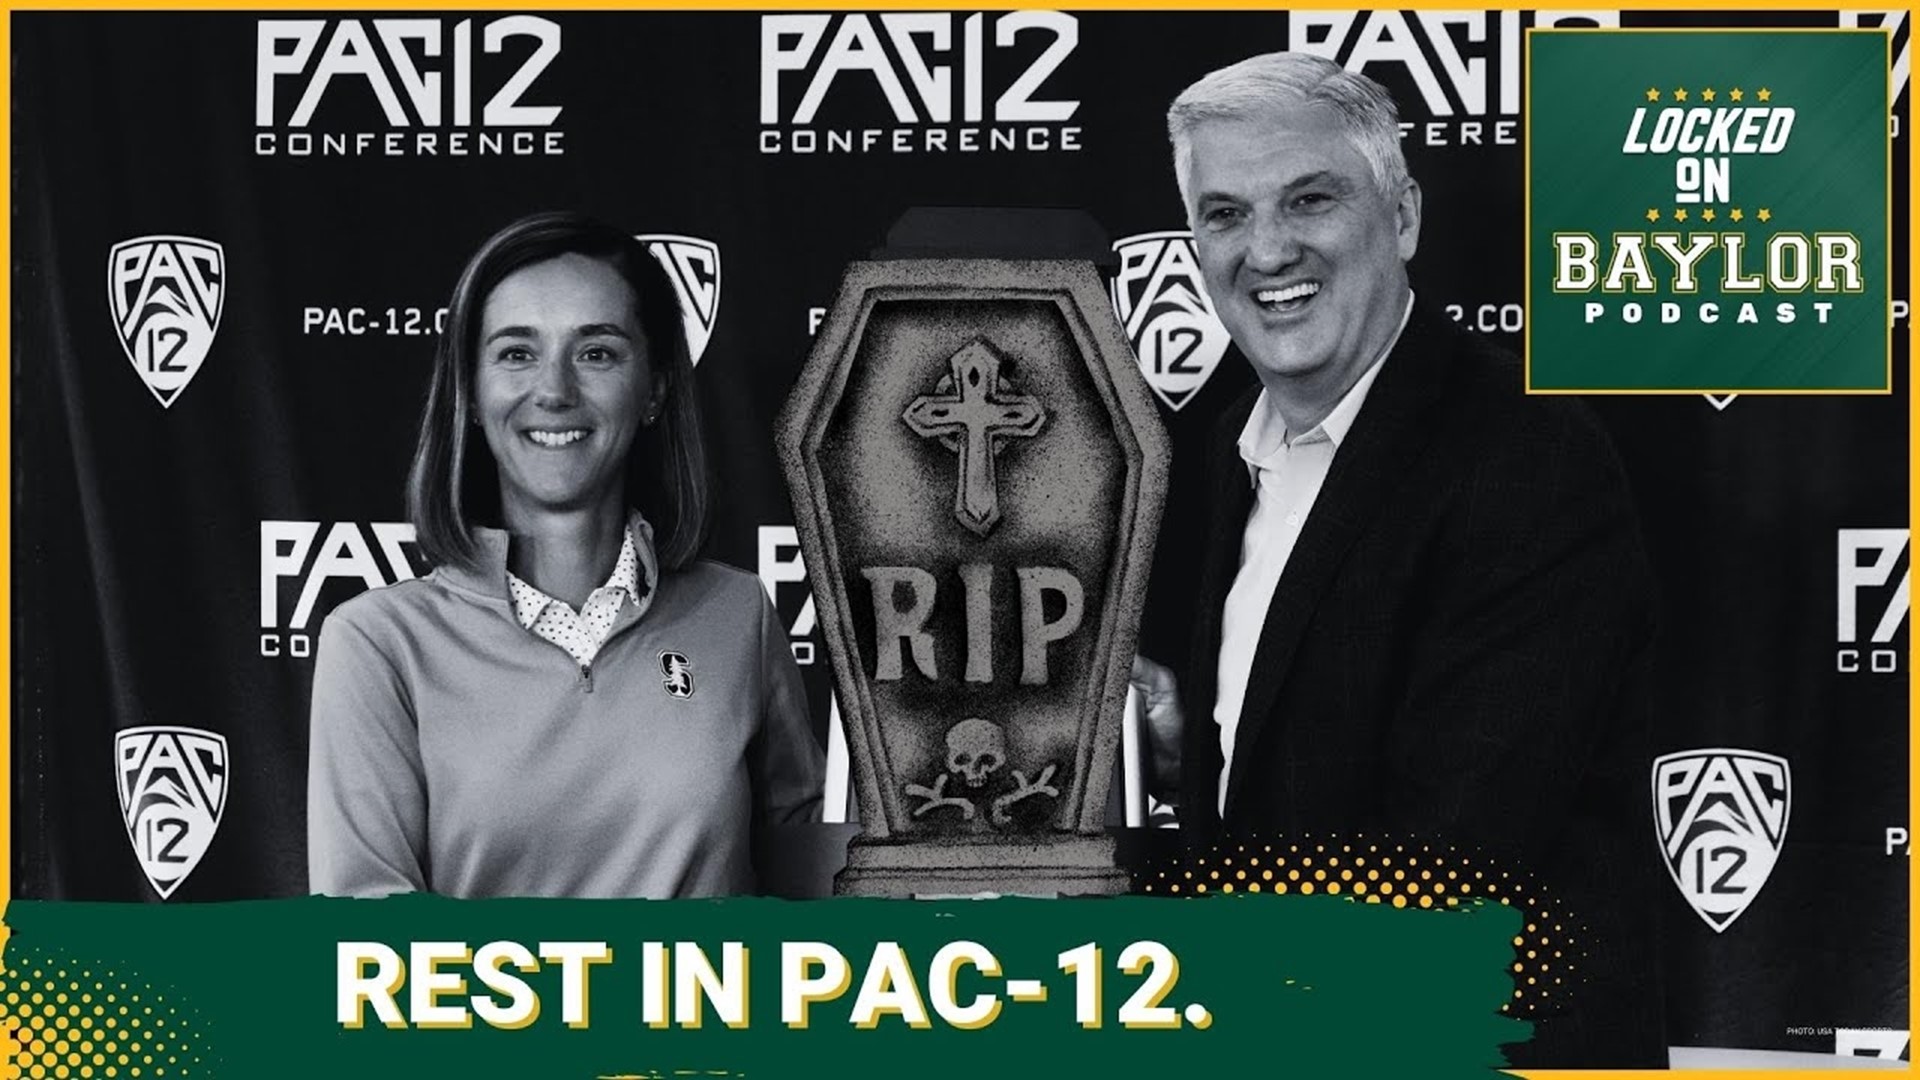 The Pac 12 conference has experienced a tumultuous journey, teetering on the brink of extinction, finding stability, and then facing uncertainty once more.